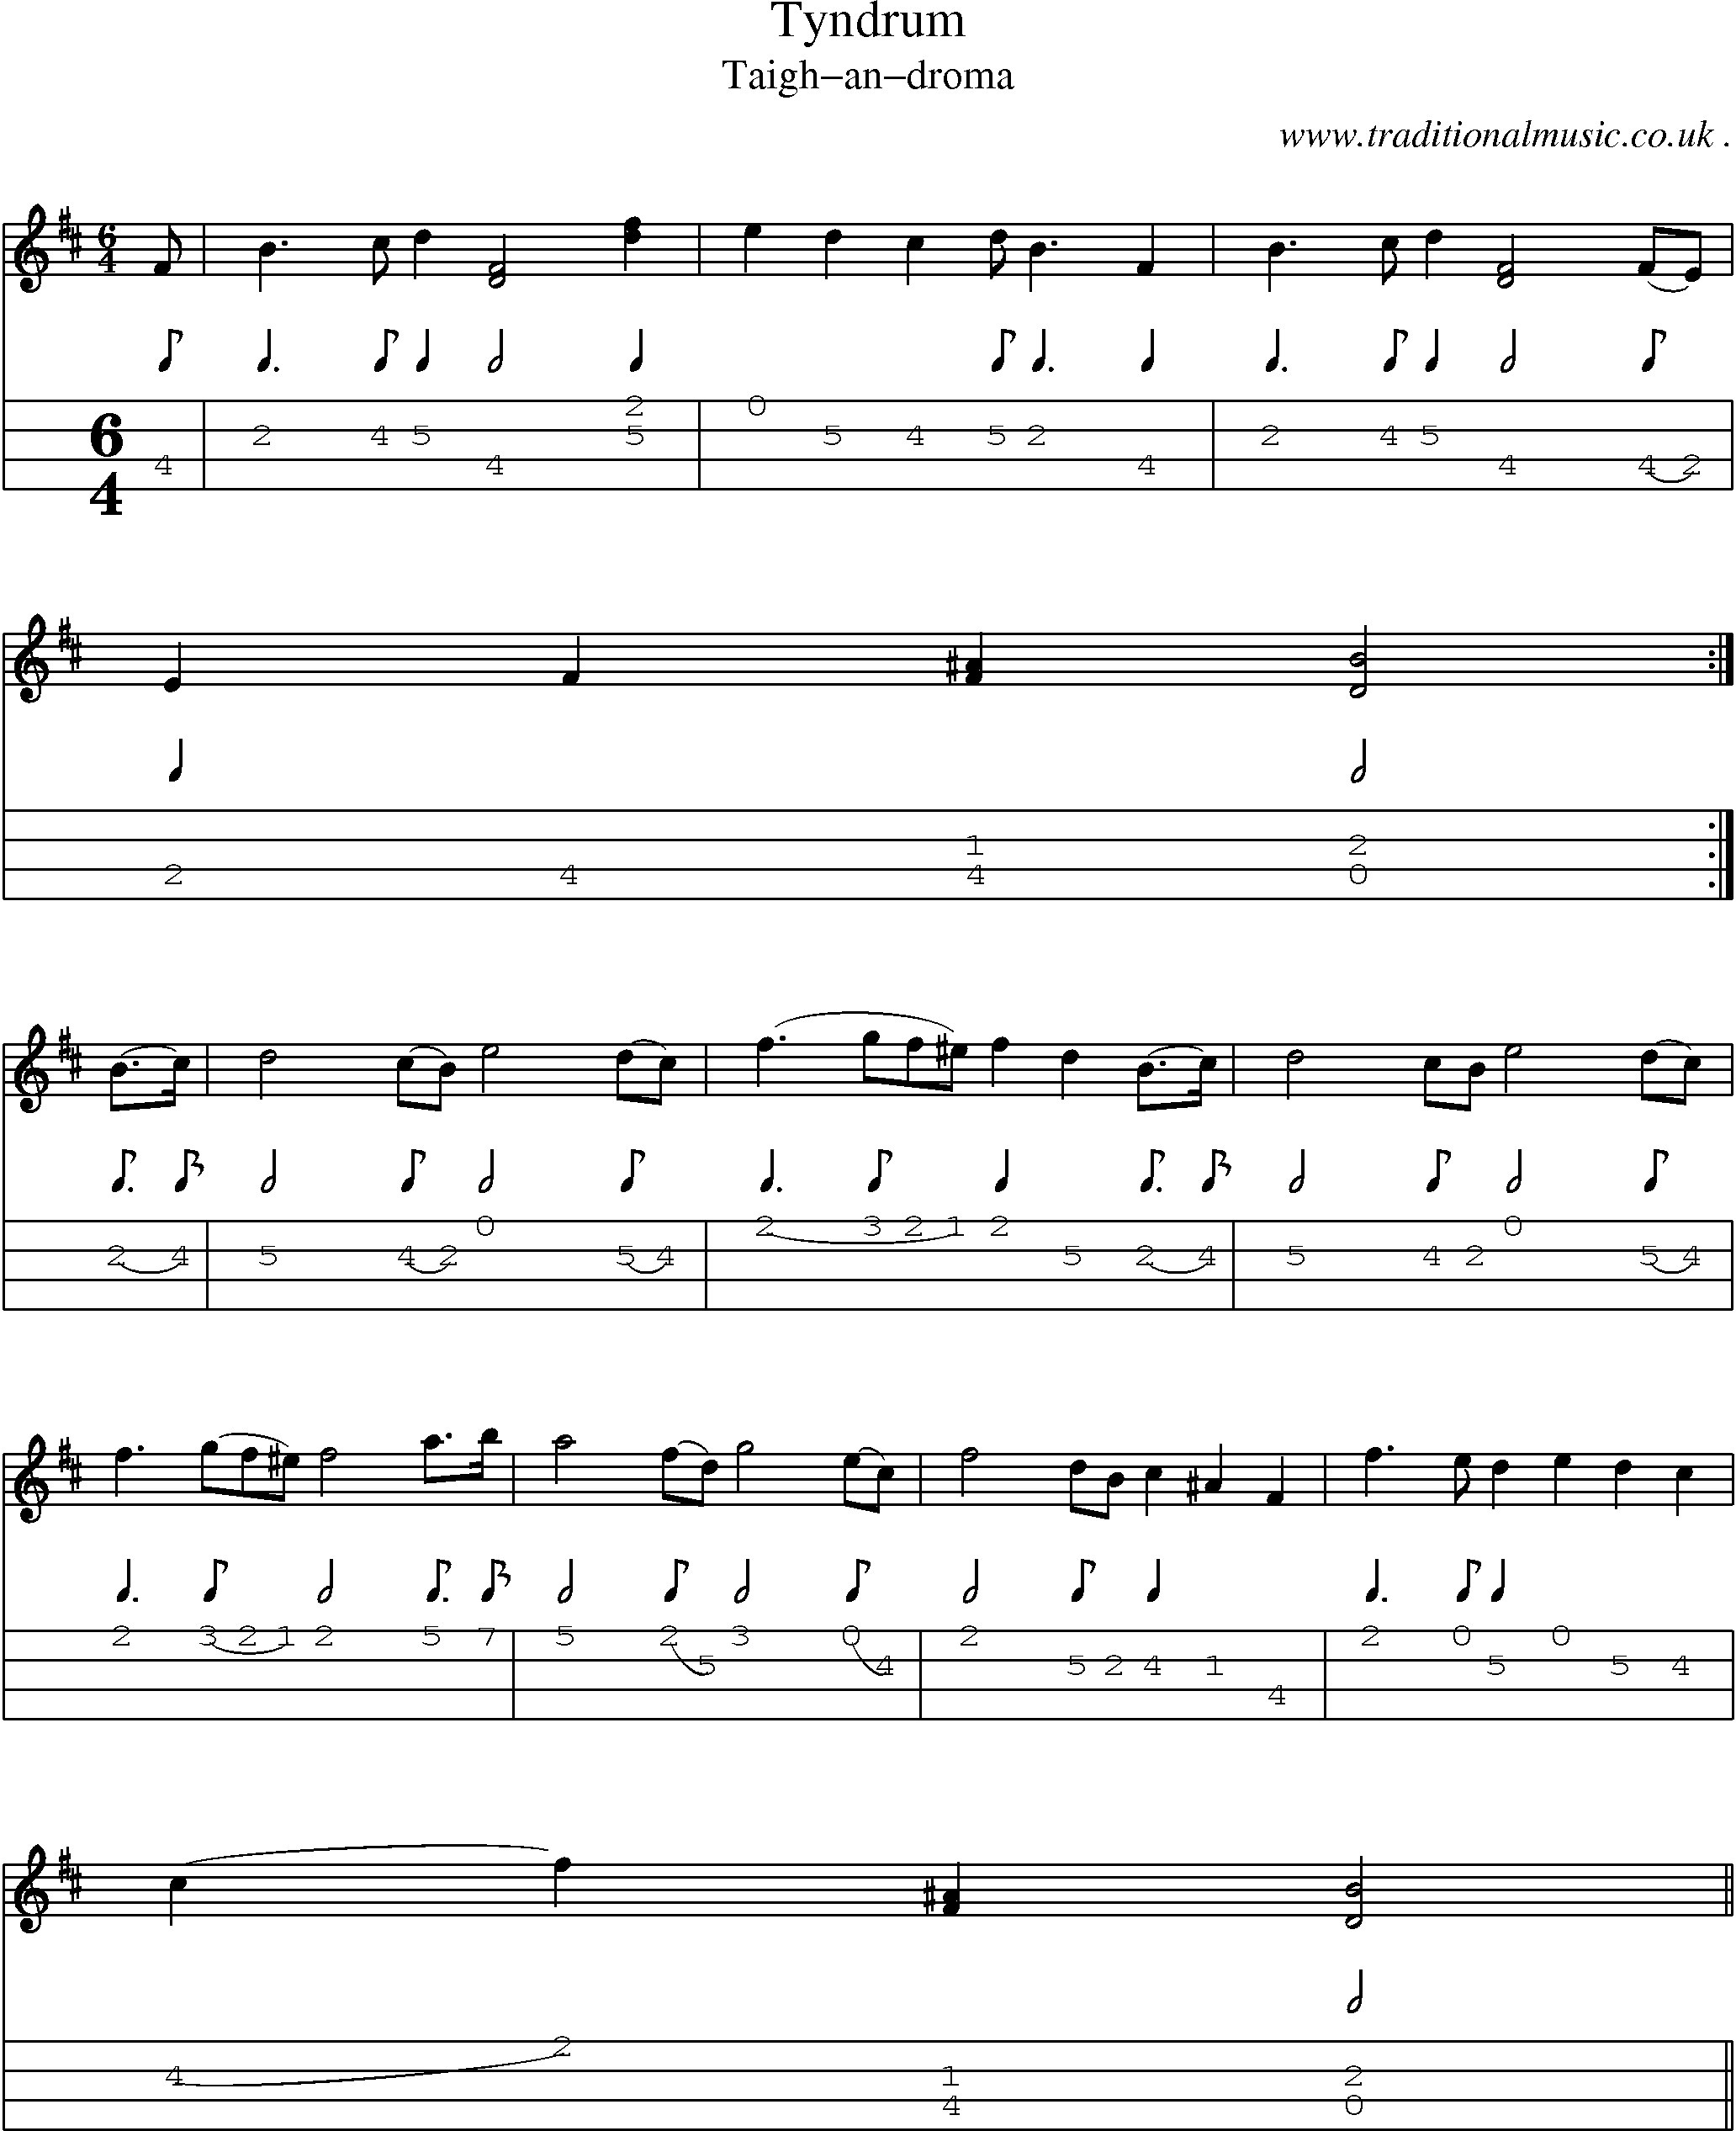 Sheet-music  score, Chords and Mandolin Tabs for Tyndrum